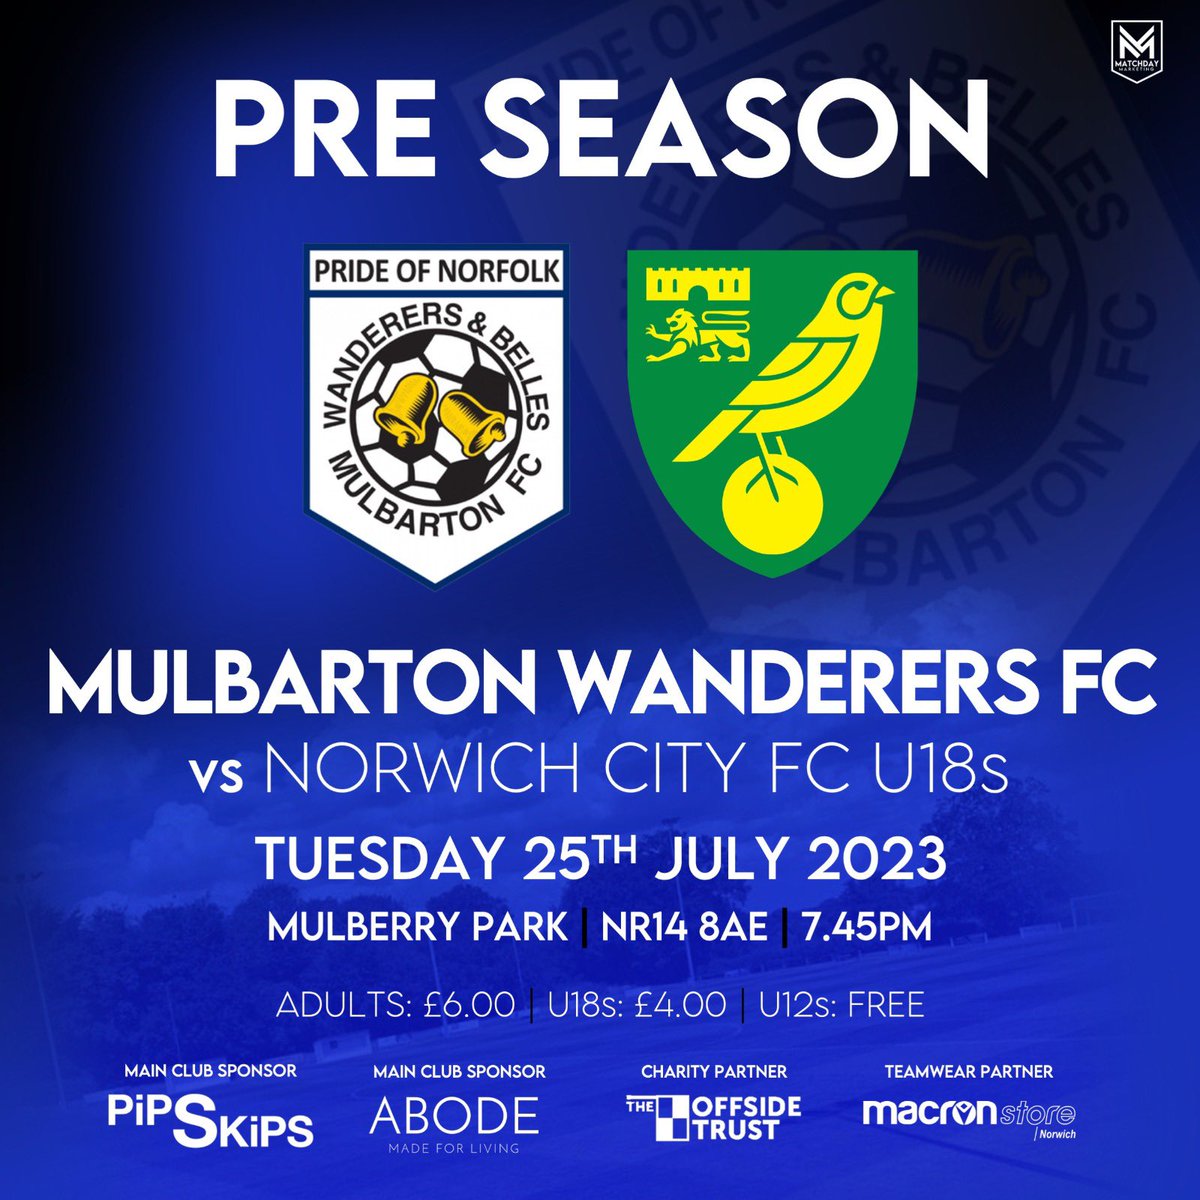 💙🖤 𝐓𝐈𝐂𝐊𝐄𝐓𝐒 𝐎𝐍 𝐒𝐀𝐋𝐄 💚💛 We’re expecting a decent crowd for our home fixture vs @NorwichCityFC u18s, so please purchase your ticket(s) online to guarantee entry. ticketsource.co.uk/mulbarton-wand… 🗓️Tues 25 July ⏰ 7:45pm ✅£6 adults / £4 u18s / u12s FREE 💙🖤 #NCFC #MWFC